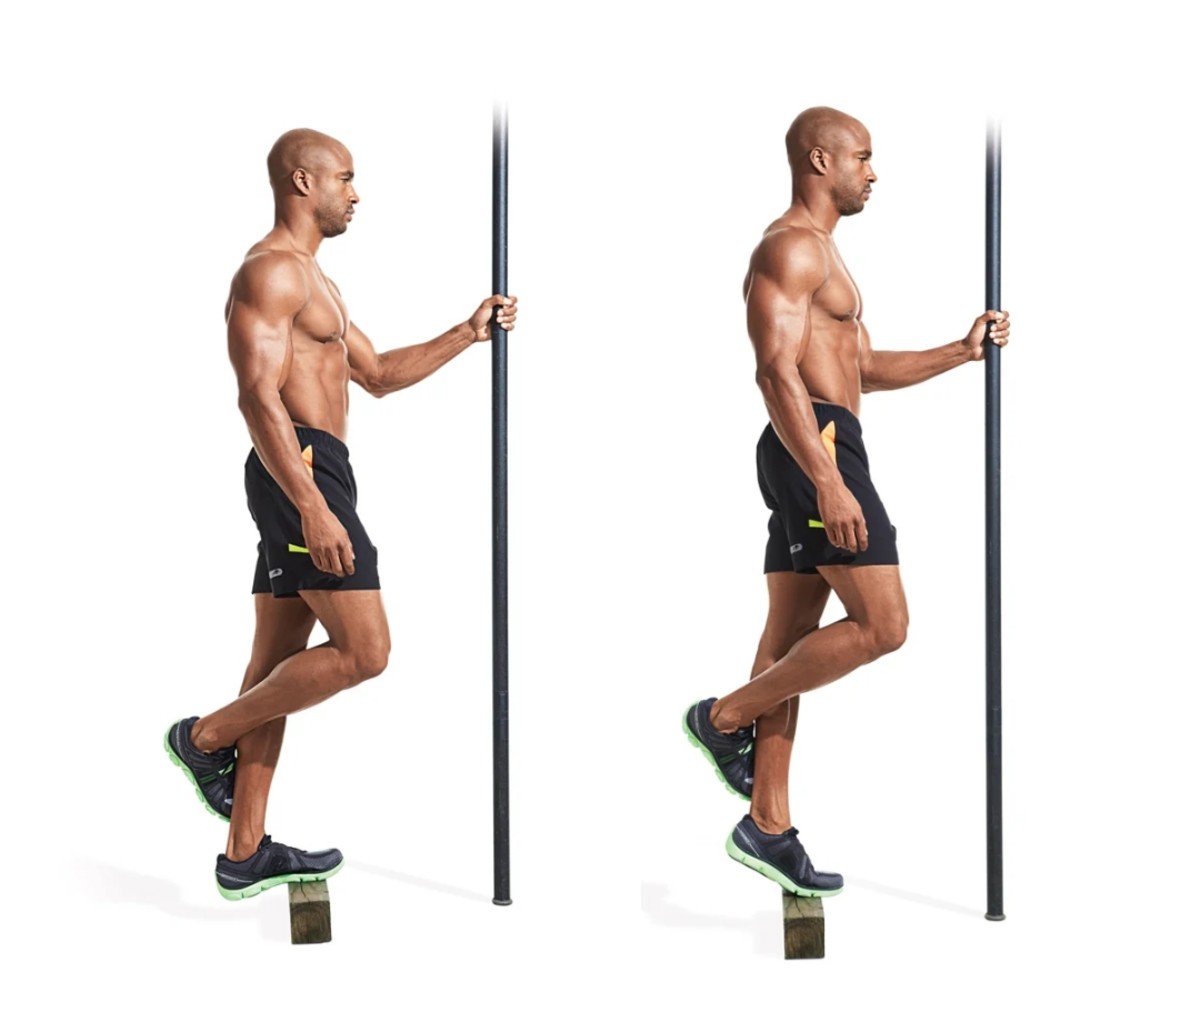 The Top 5 Best Calf Exercises